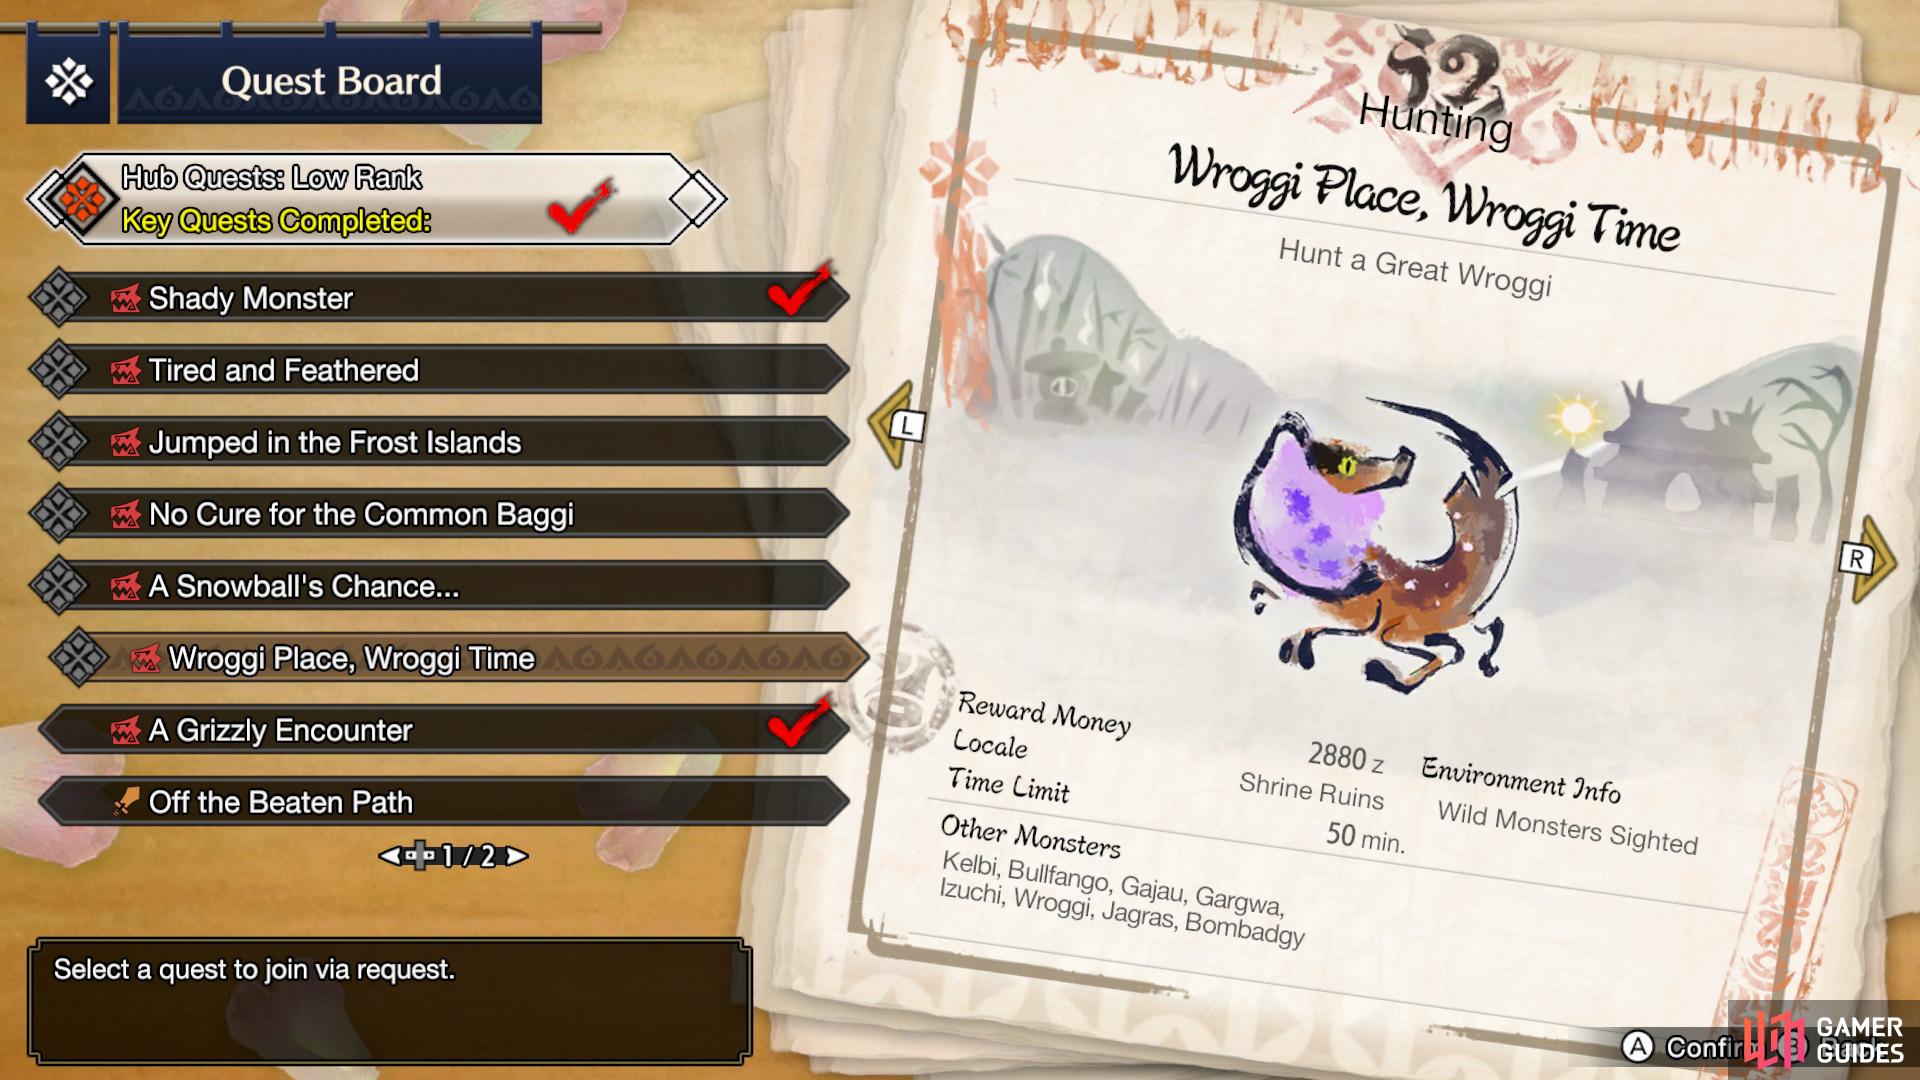 The Wroggi Place, Wroggi Time Quest becomes available when you reach 1* Hub Quests.